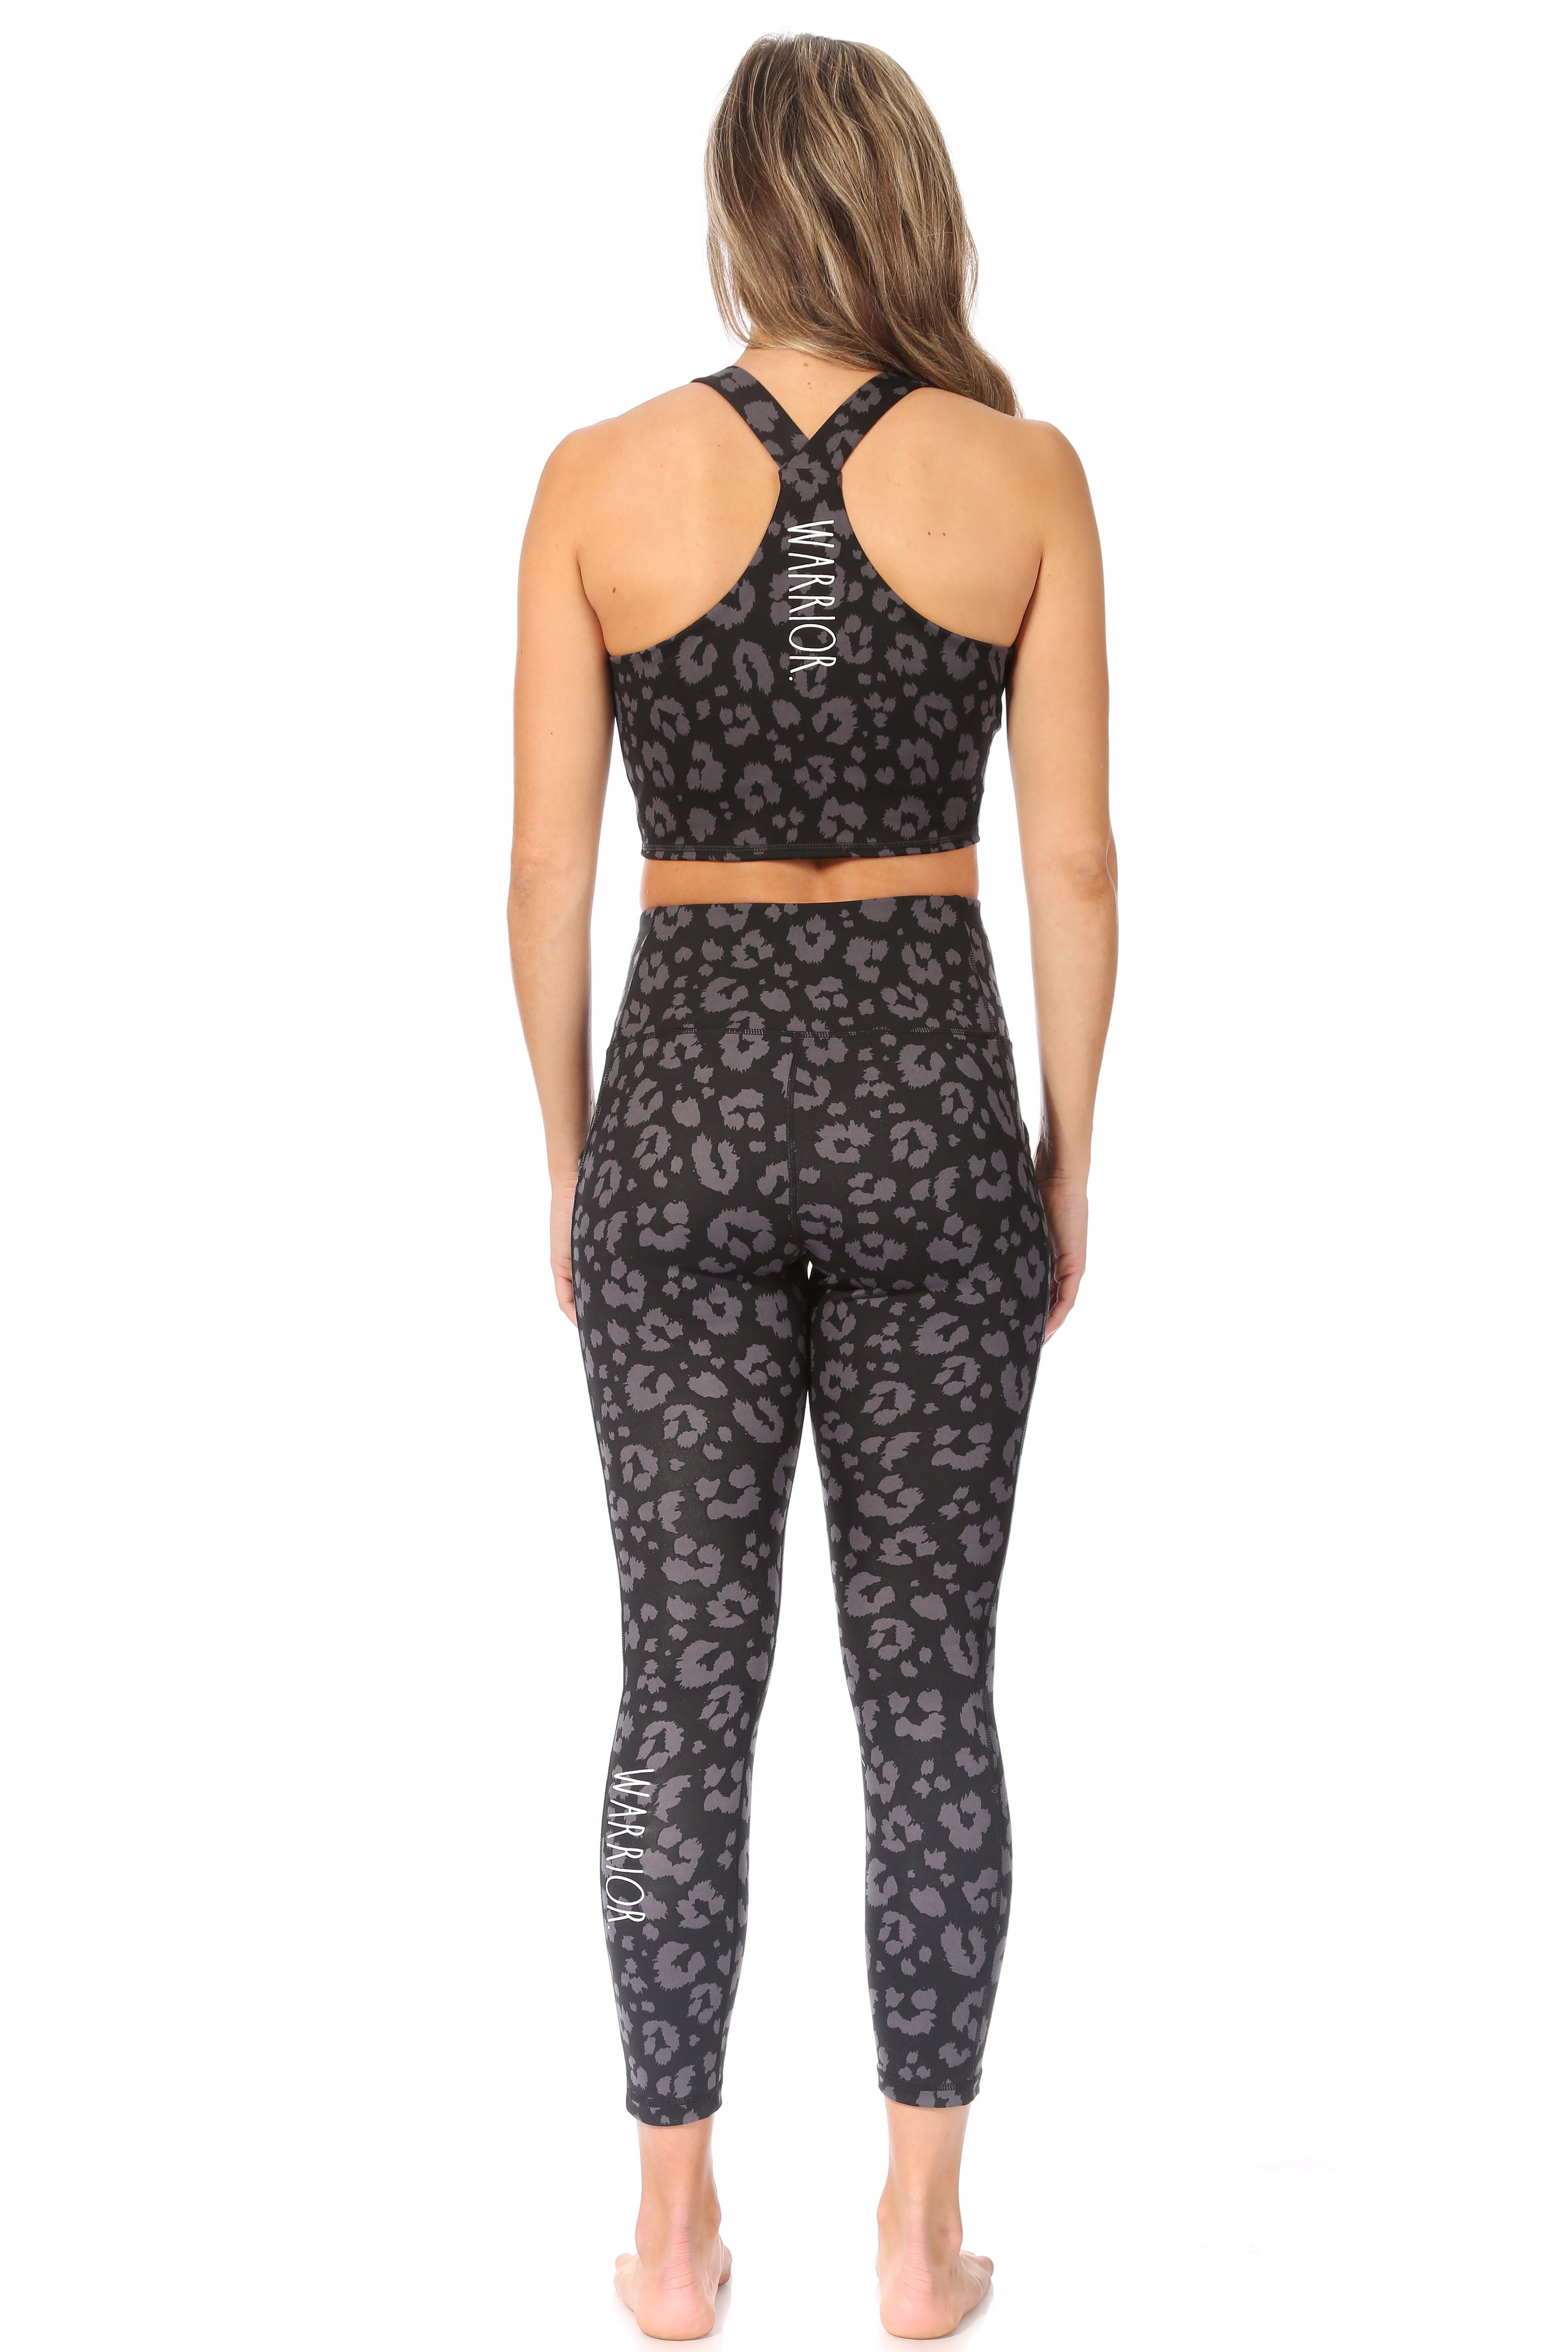 Women's "WARRIOR" High-Waisted Performance Legging with Two Side Pockets - Rae Dunn Wear